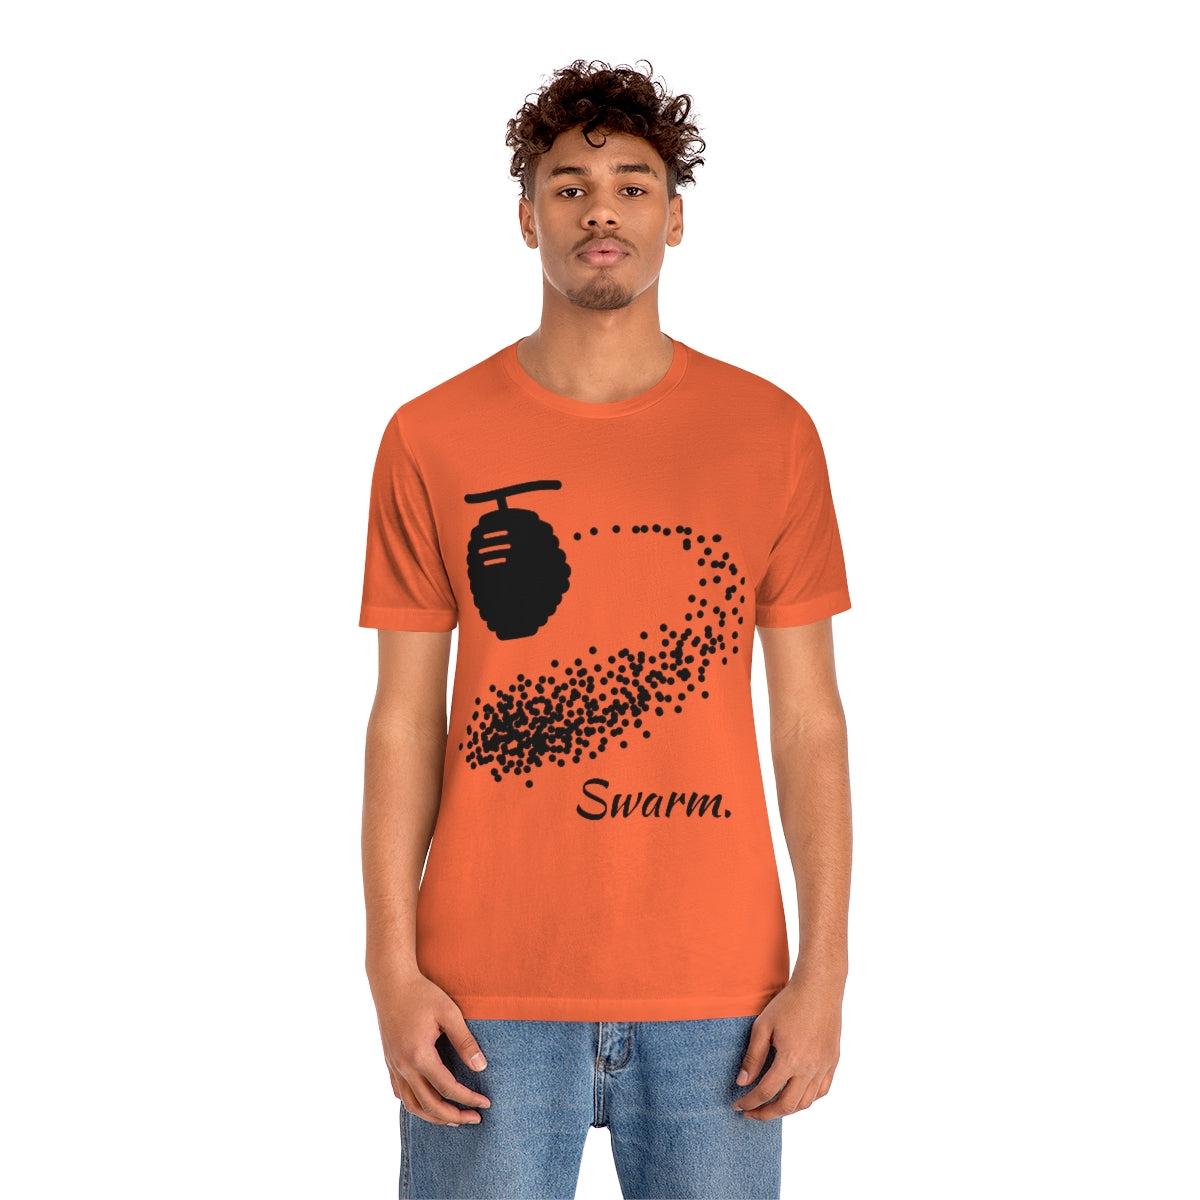 Swarm of Bees T-shirt